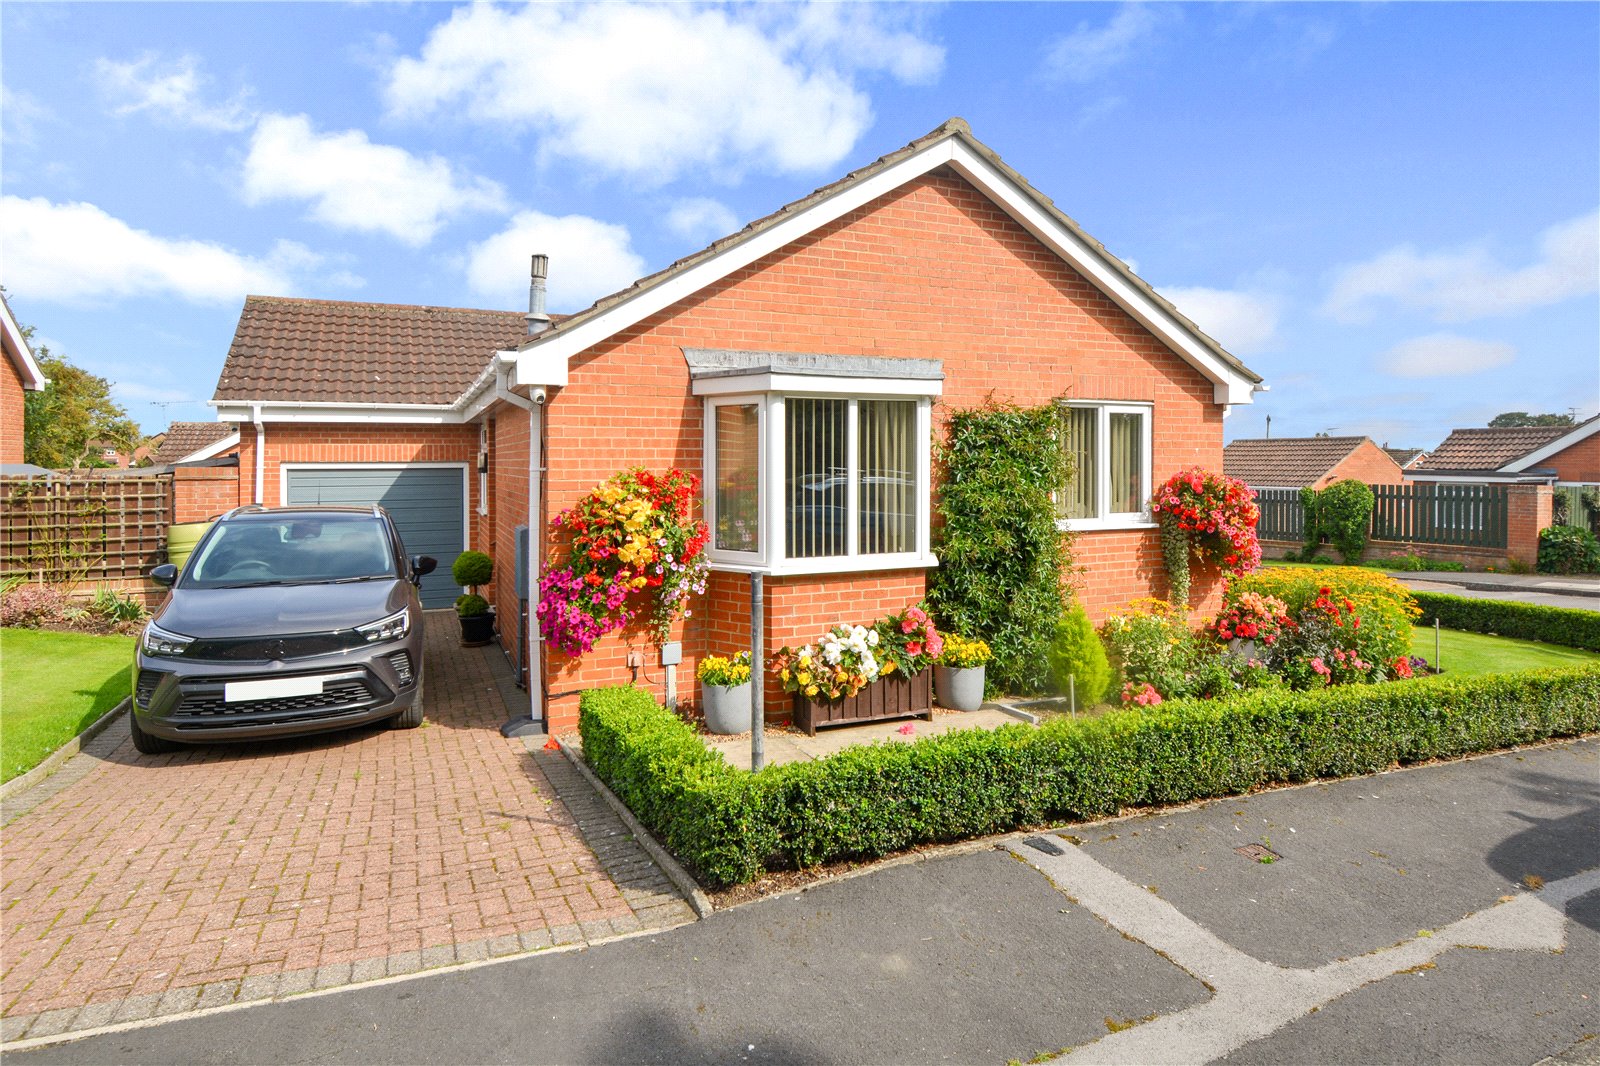 2 bed bungalow for sale in Mill Lane, Bridlington - Property Image 1